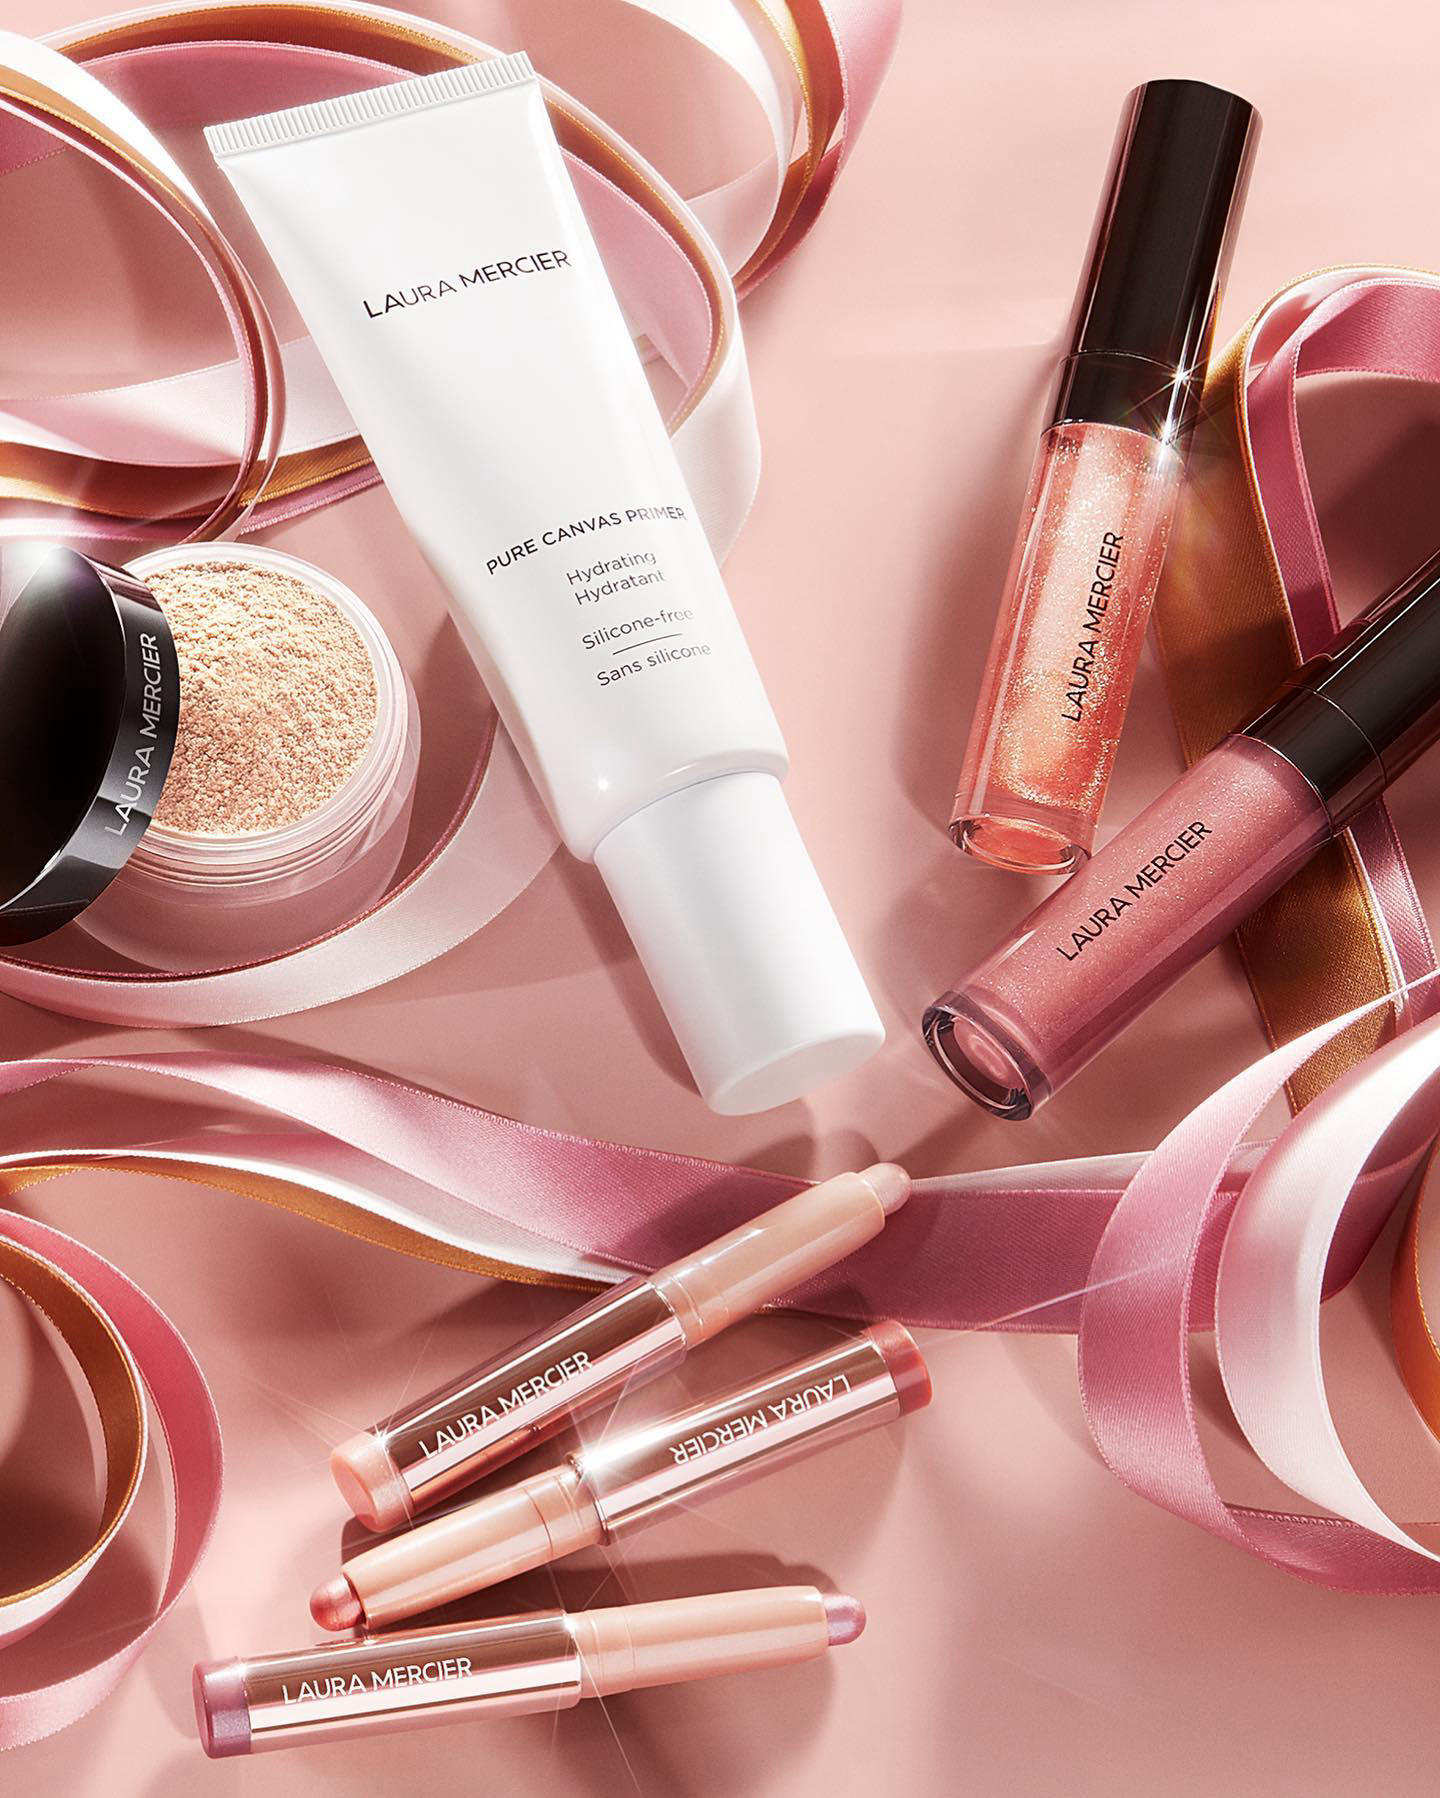 image  1 Laura Mercier - Luxe limited editions that elevate natural beauty